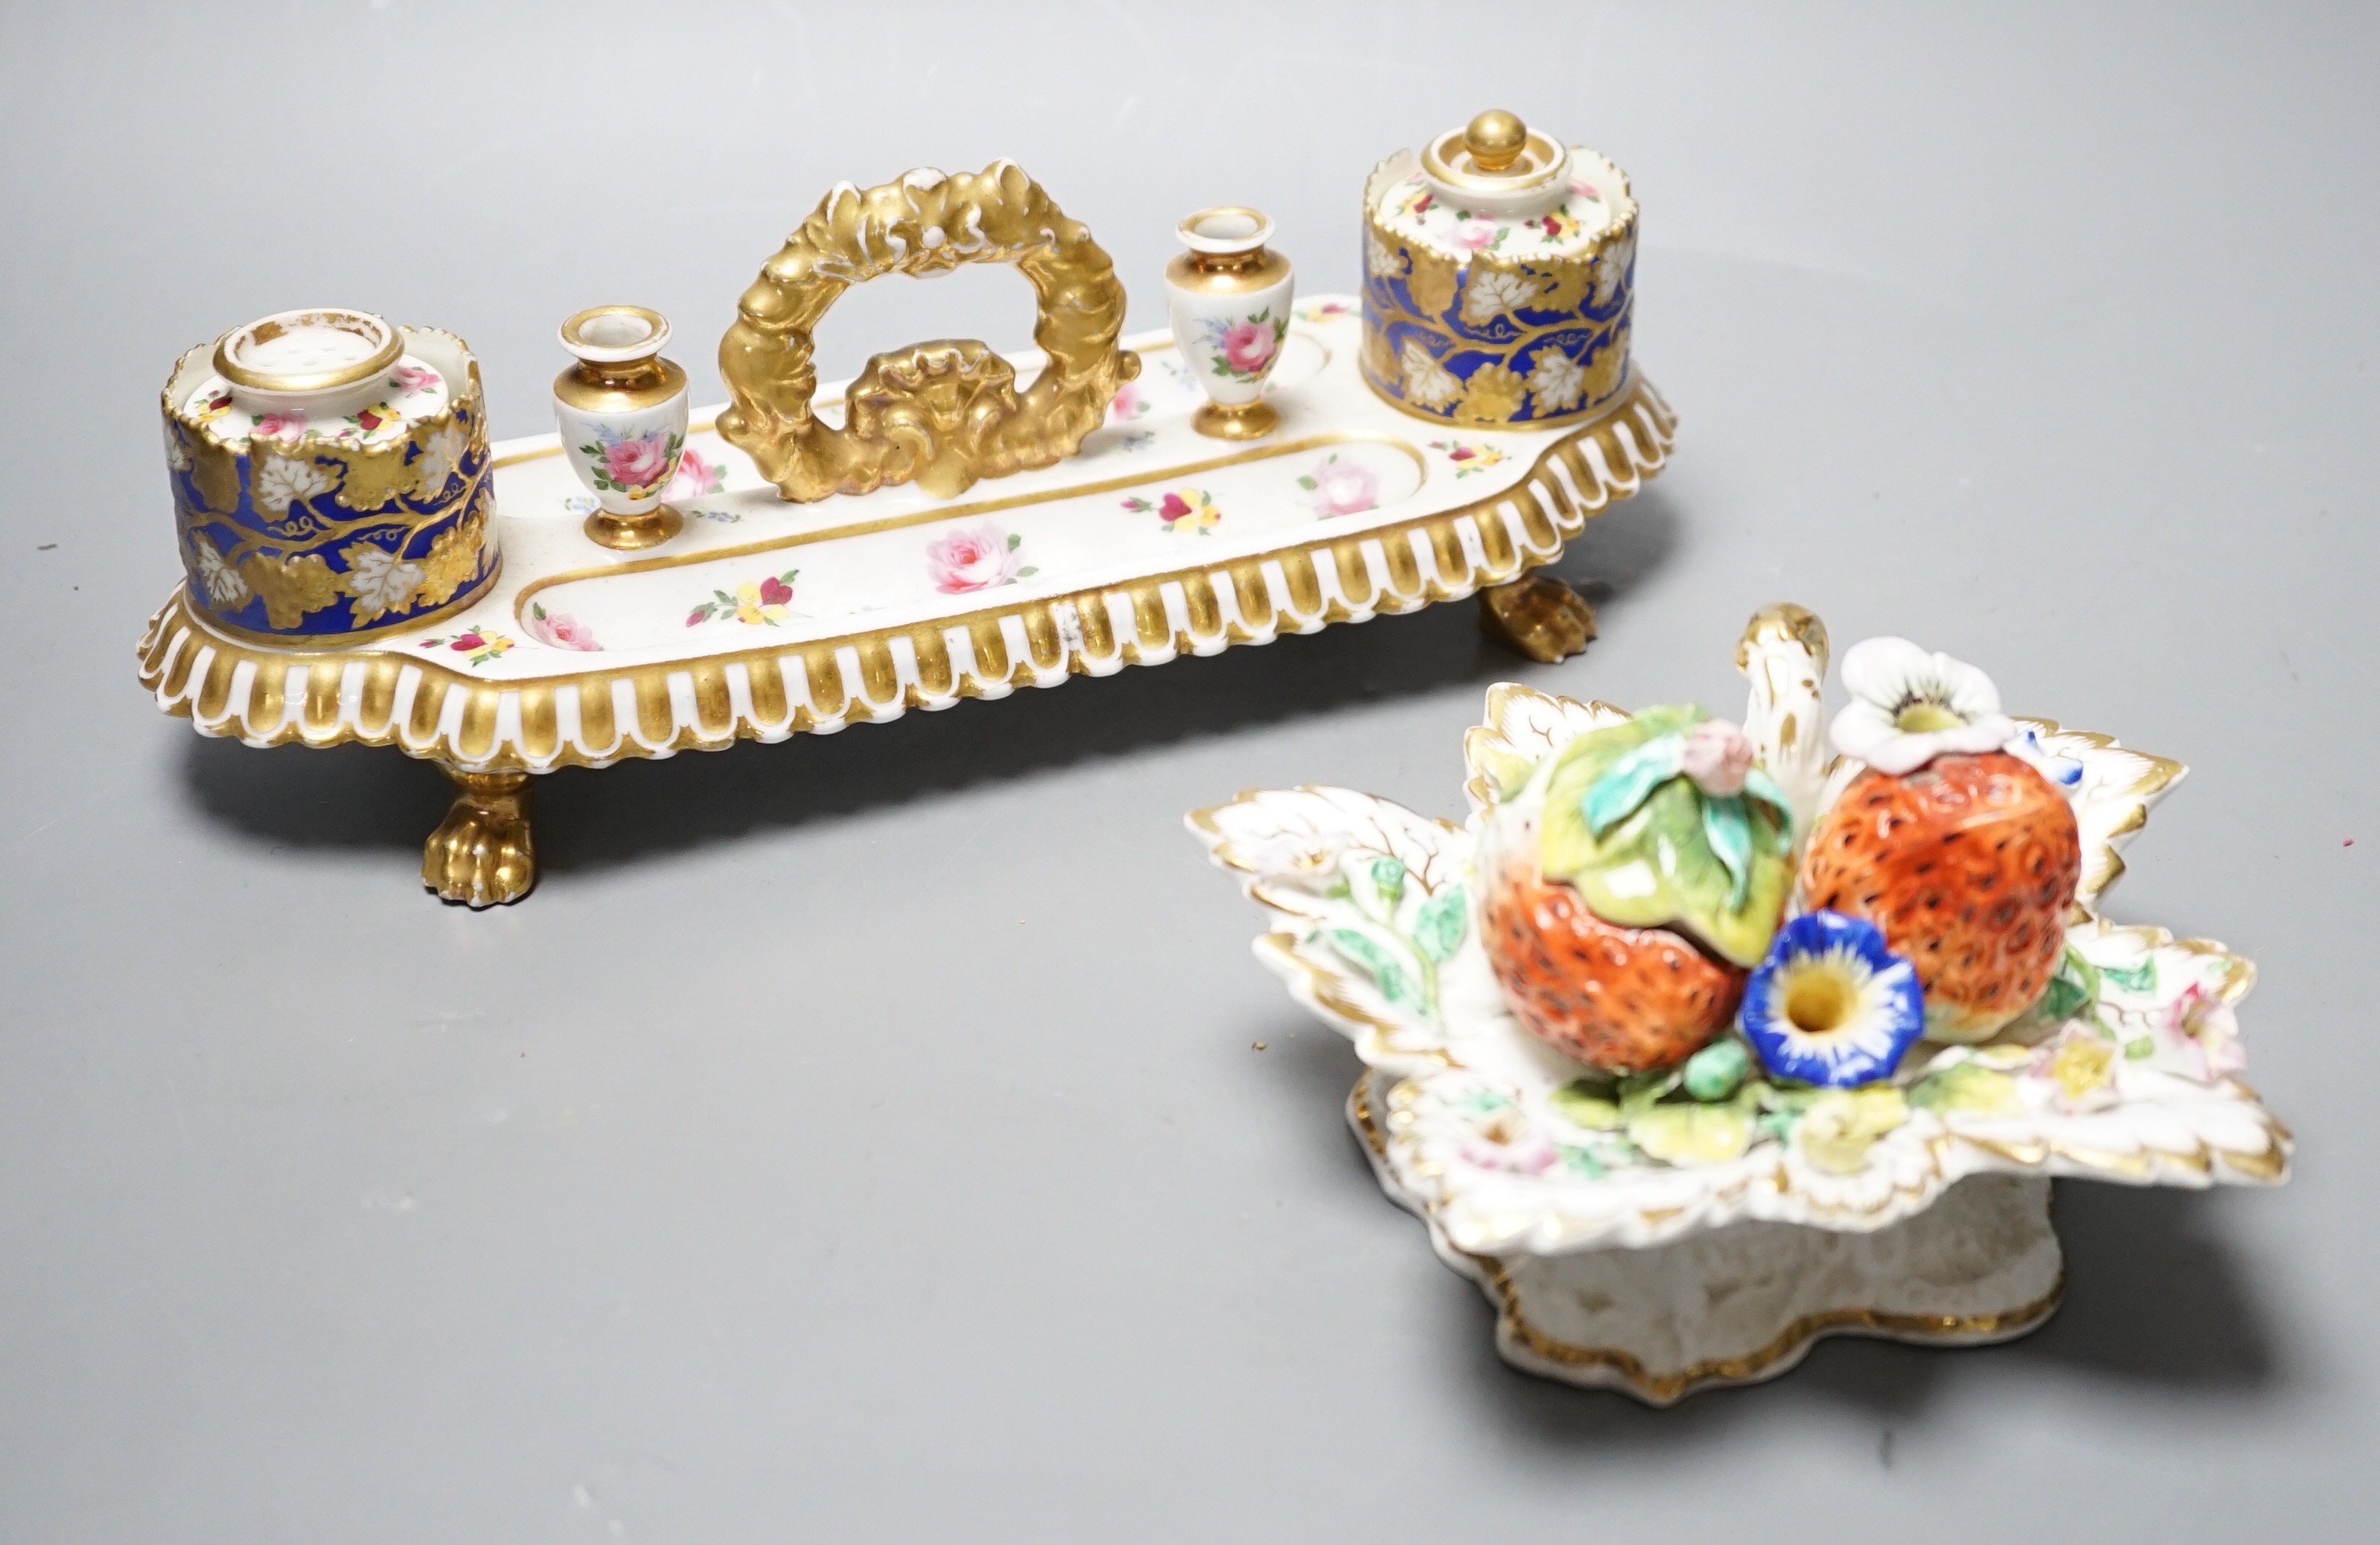 A 19th century Chamberlain Worcester inkstand painted with roses and heatsease, script mark, and a 19th century English porcelain leaf shaped inkwell with strawberry shaped wells, encrusted with flowers picked out in gil